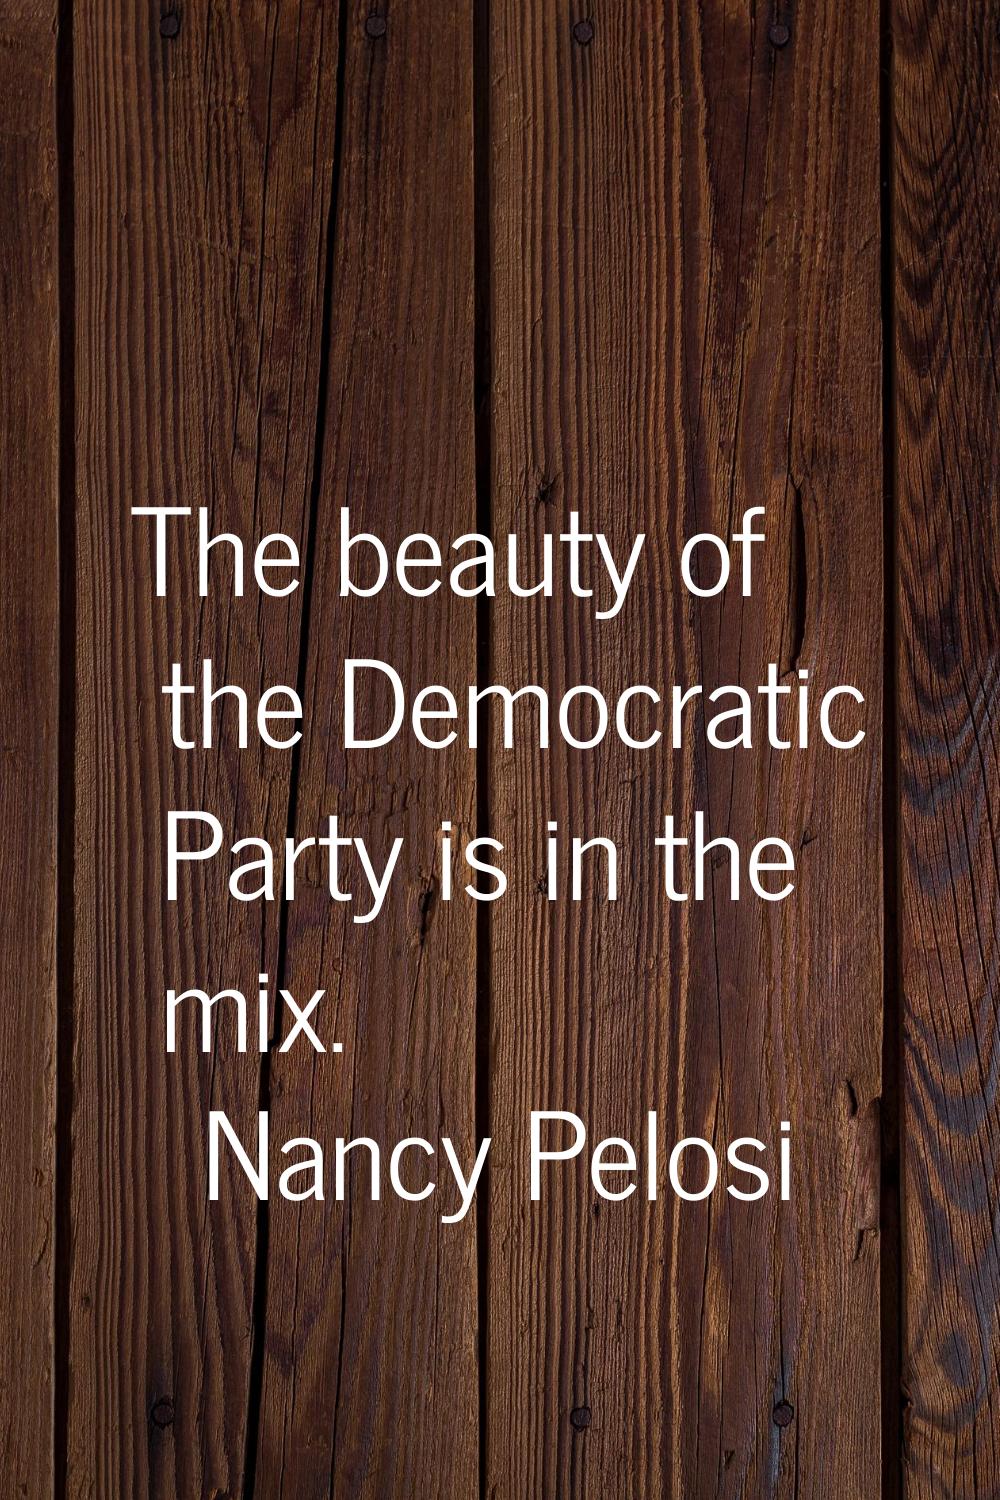 The beauty of the Democratic Party is in the mix.